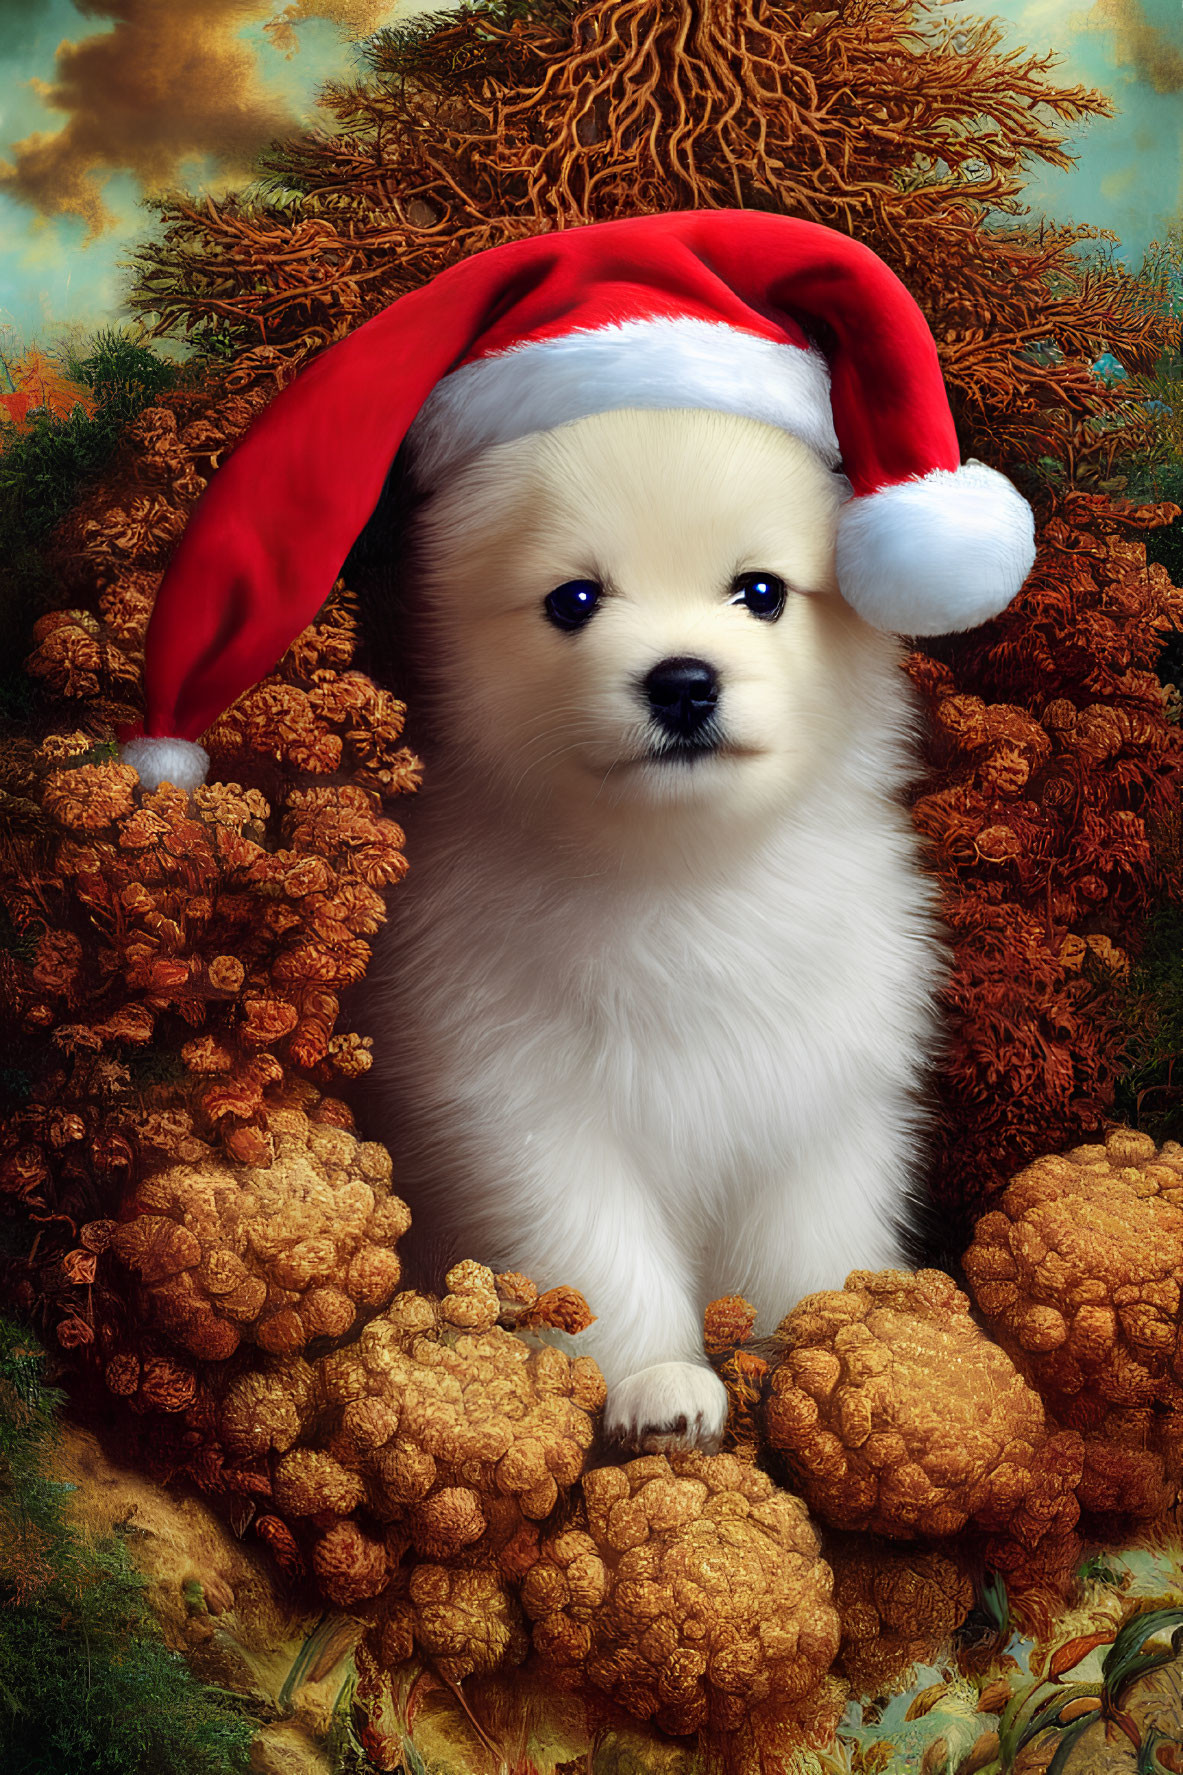 Cream-Colored Puppy in Santa Hat Among Autumn Foliage